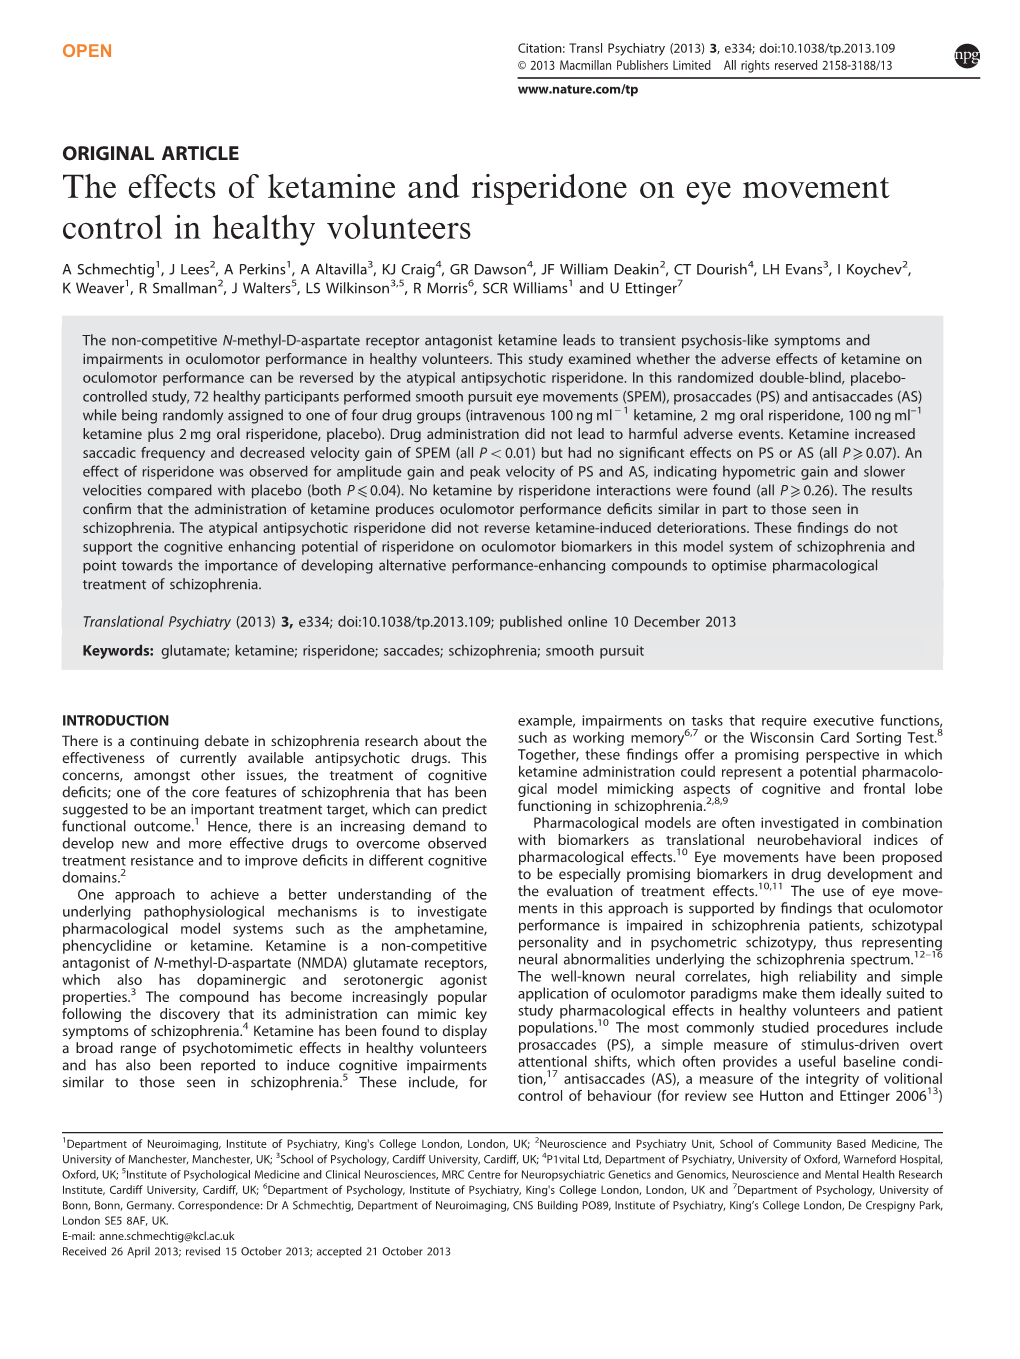 The Effects of Ketamine and Risperidone on Eye Movement Control in Healthy Volunteers